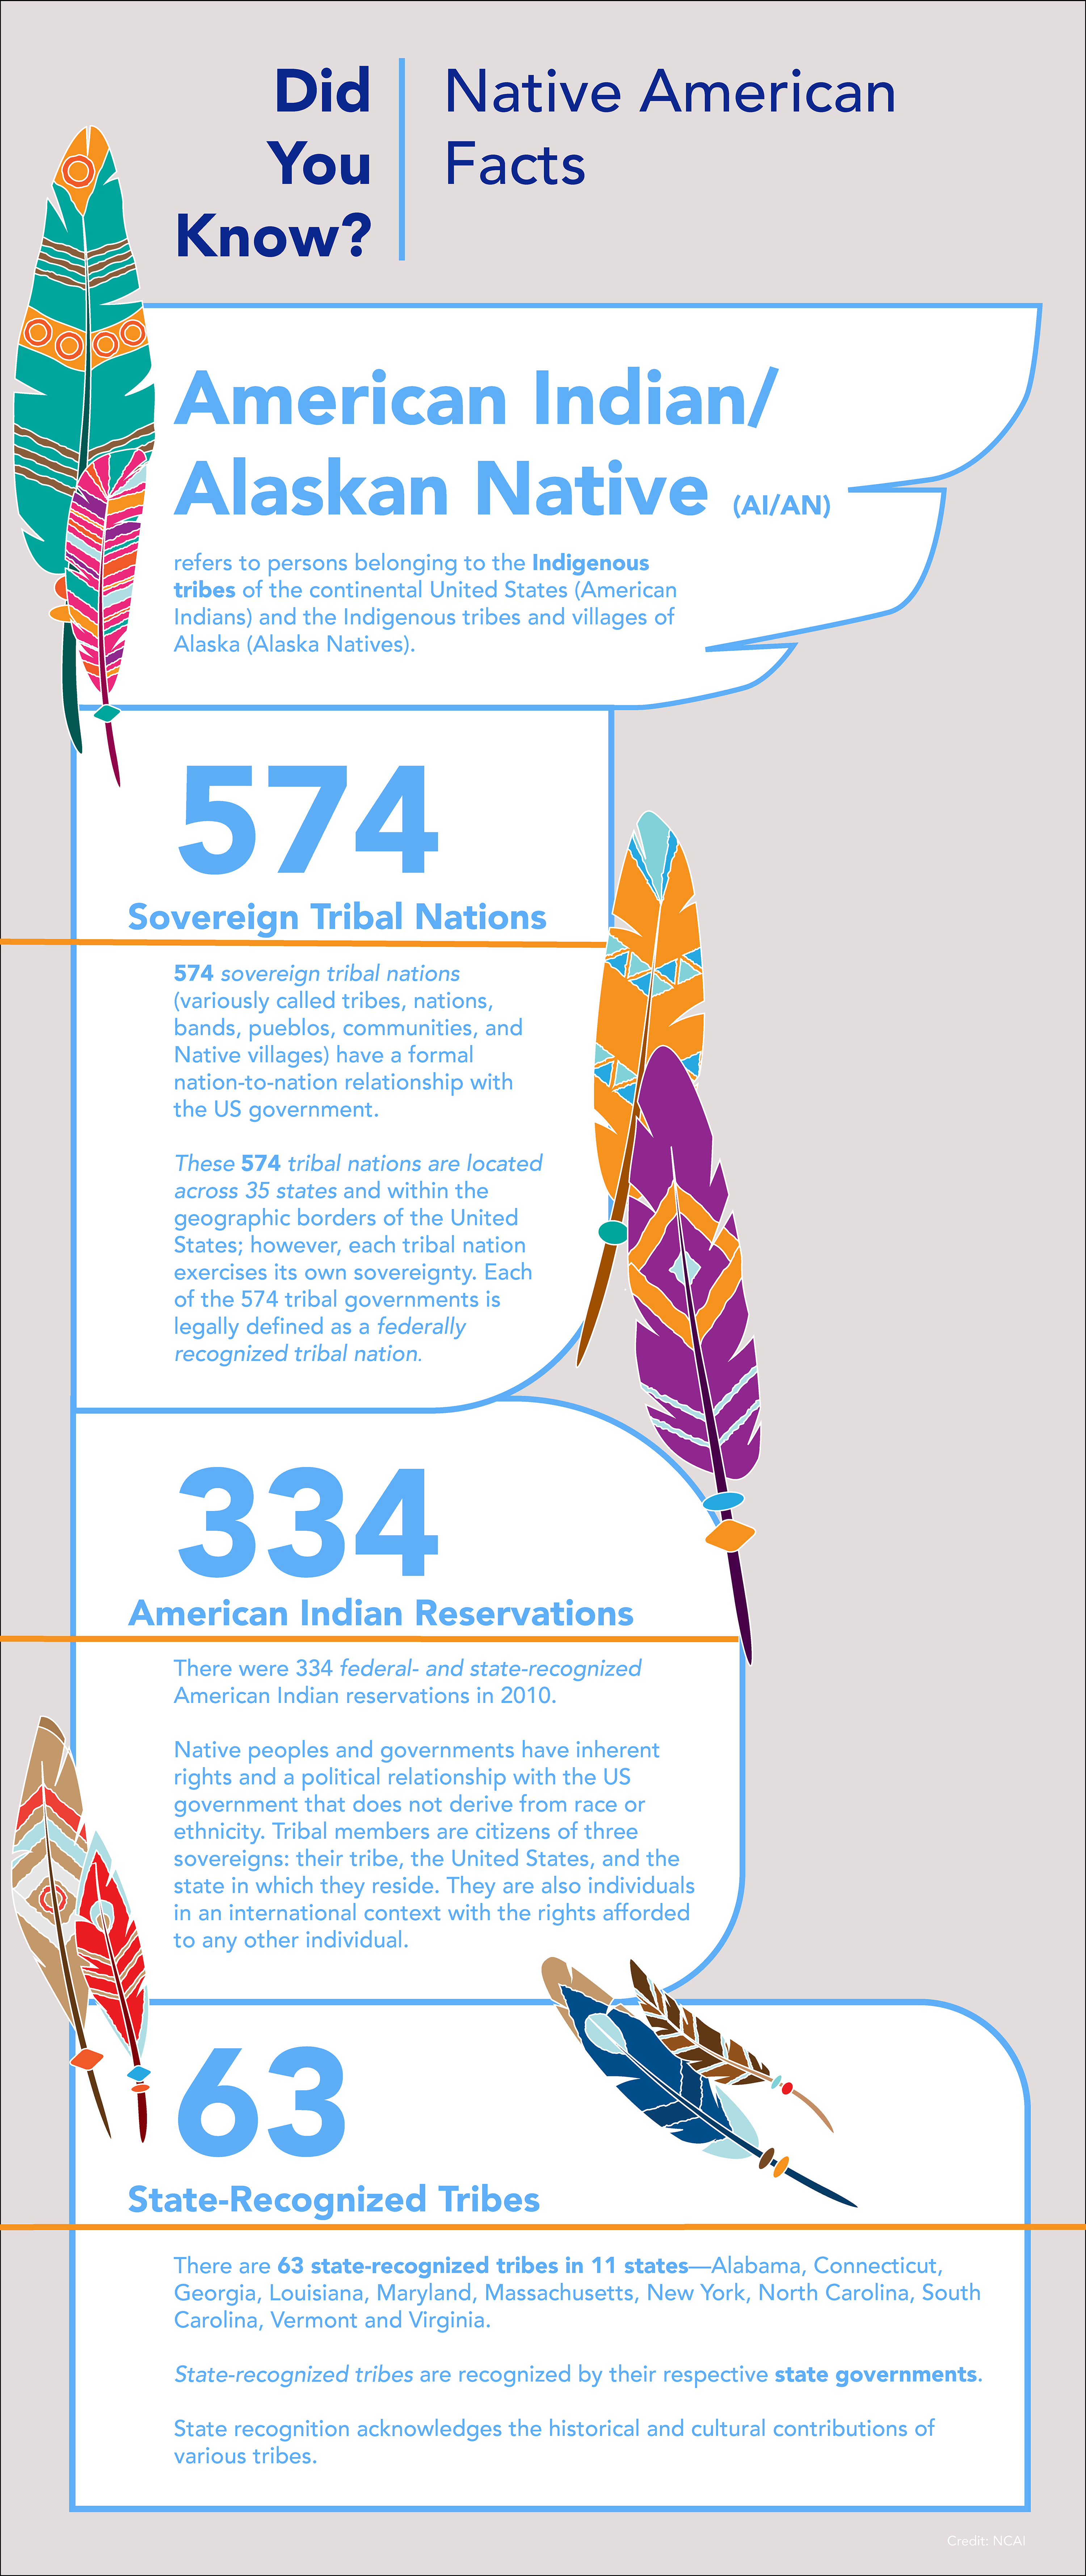 10 facts about native american history